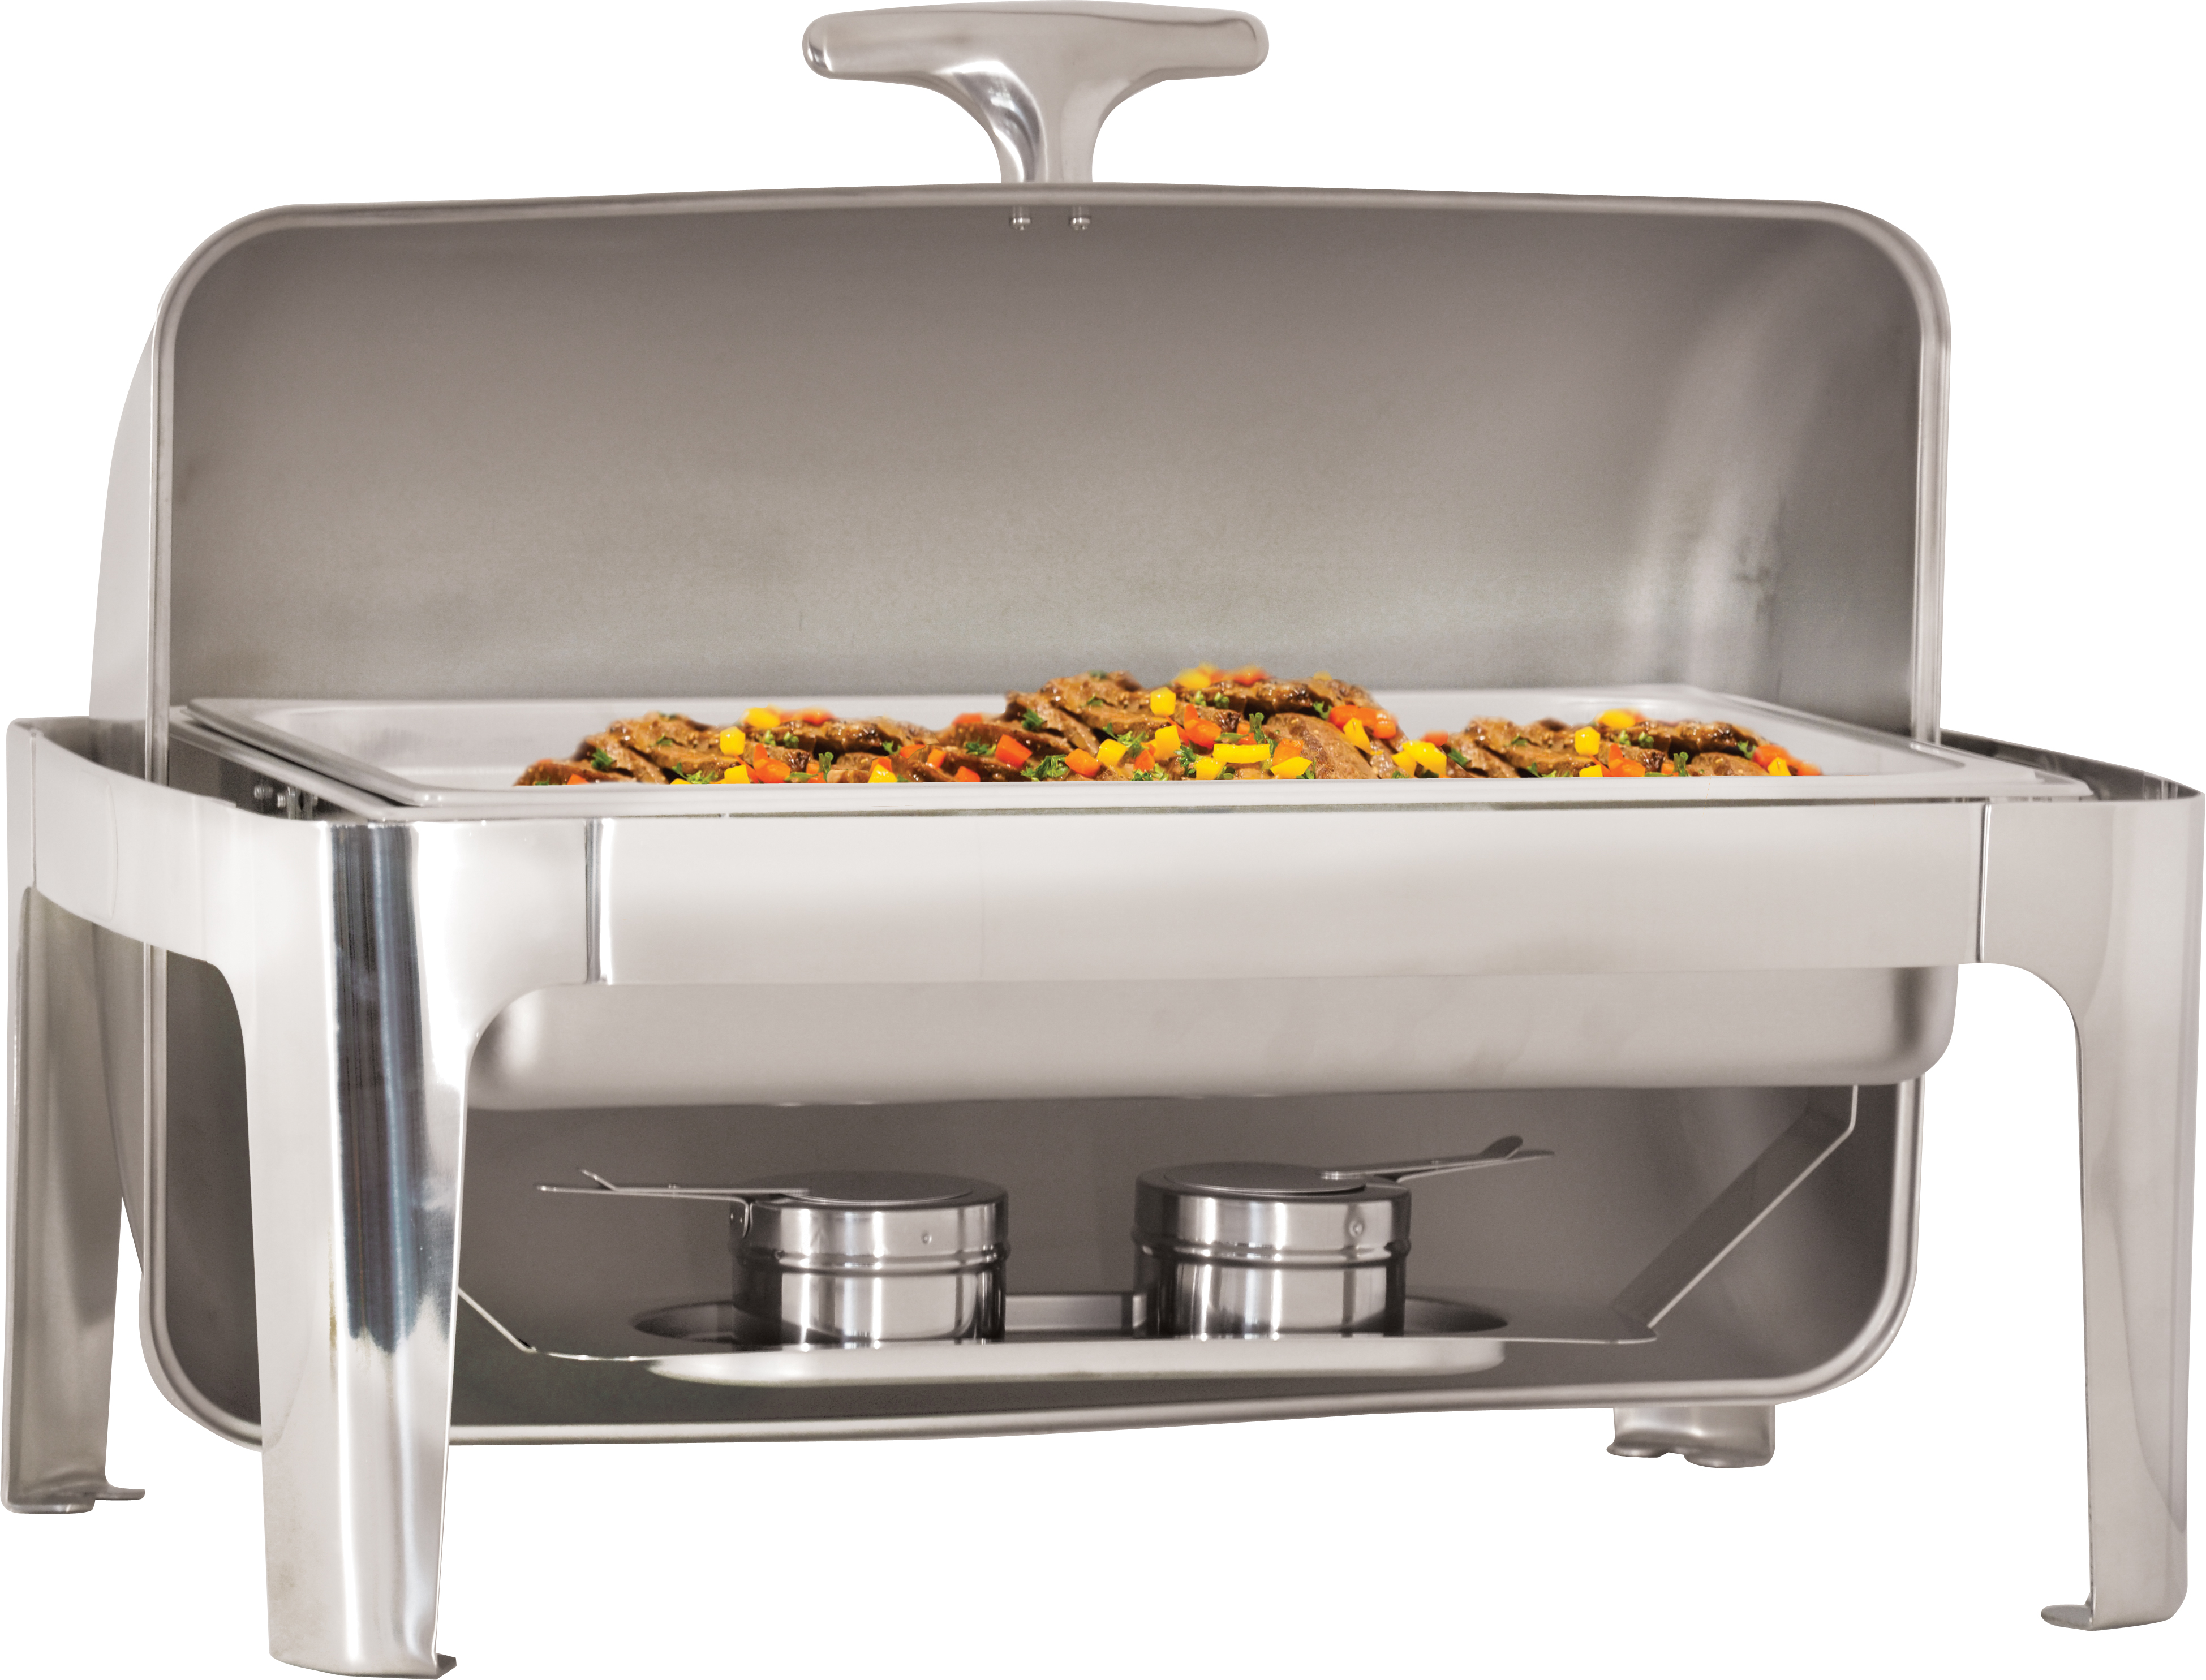 food chafing dishes